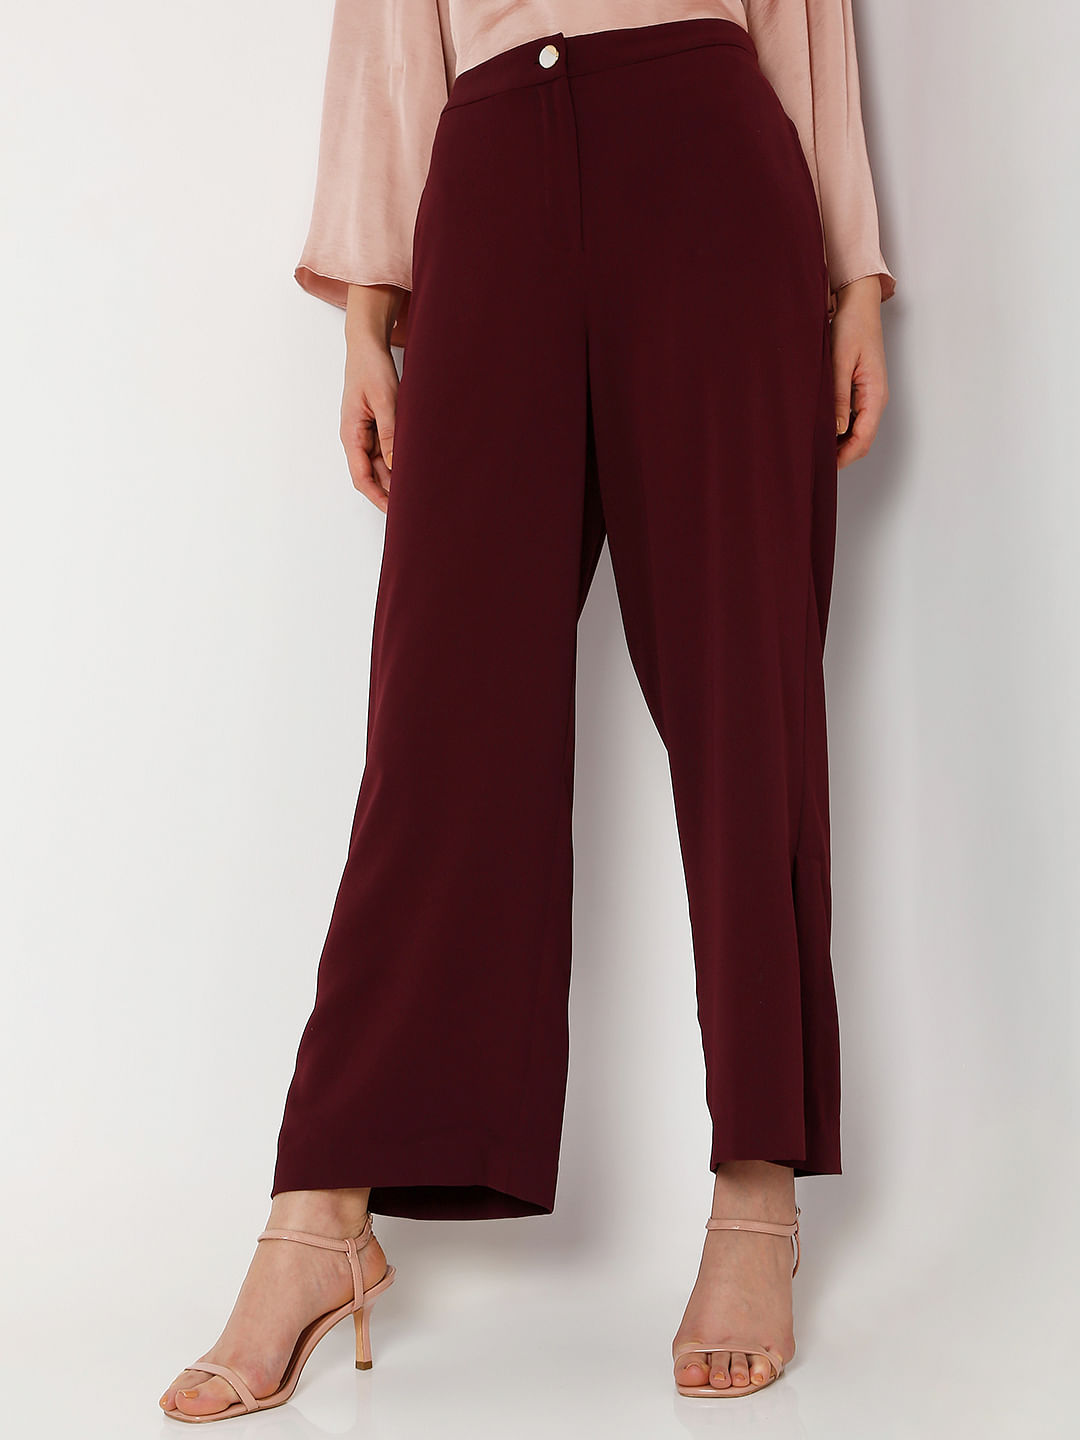 Buy Womens High Waist Trousers Wide Leg Pants for Women Online in India   Etsy